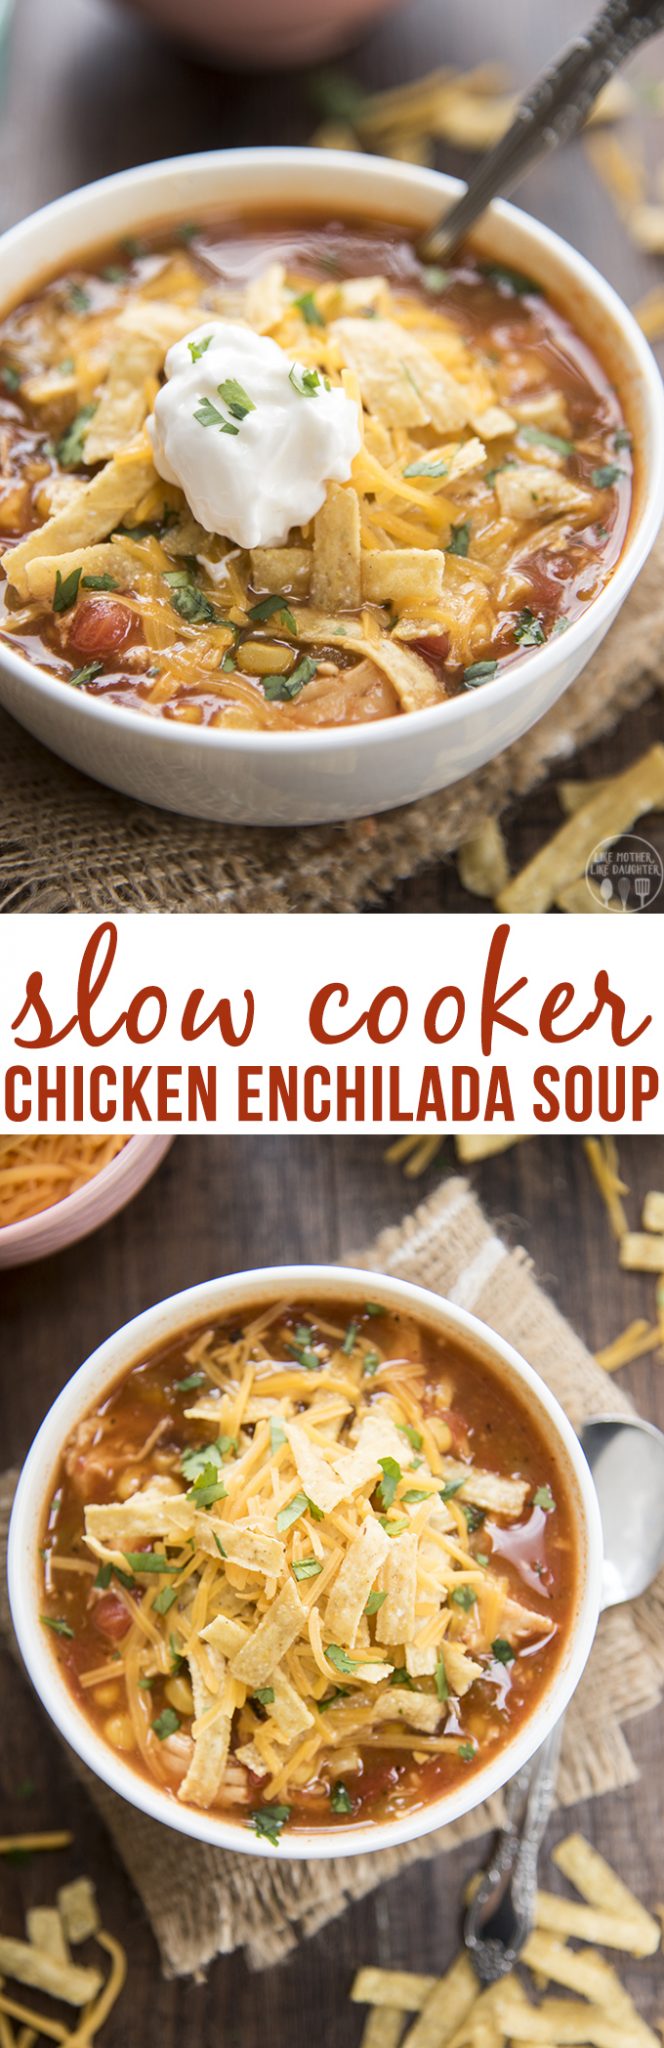 Slow cooker chicken enchilada soup is packed full of flavor, with hardly any work, its a meal that the whole family loves.